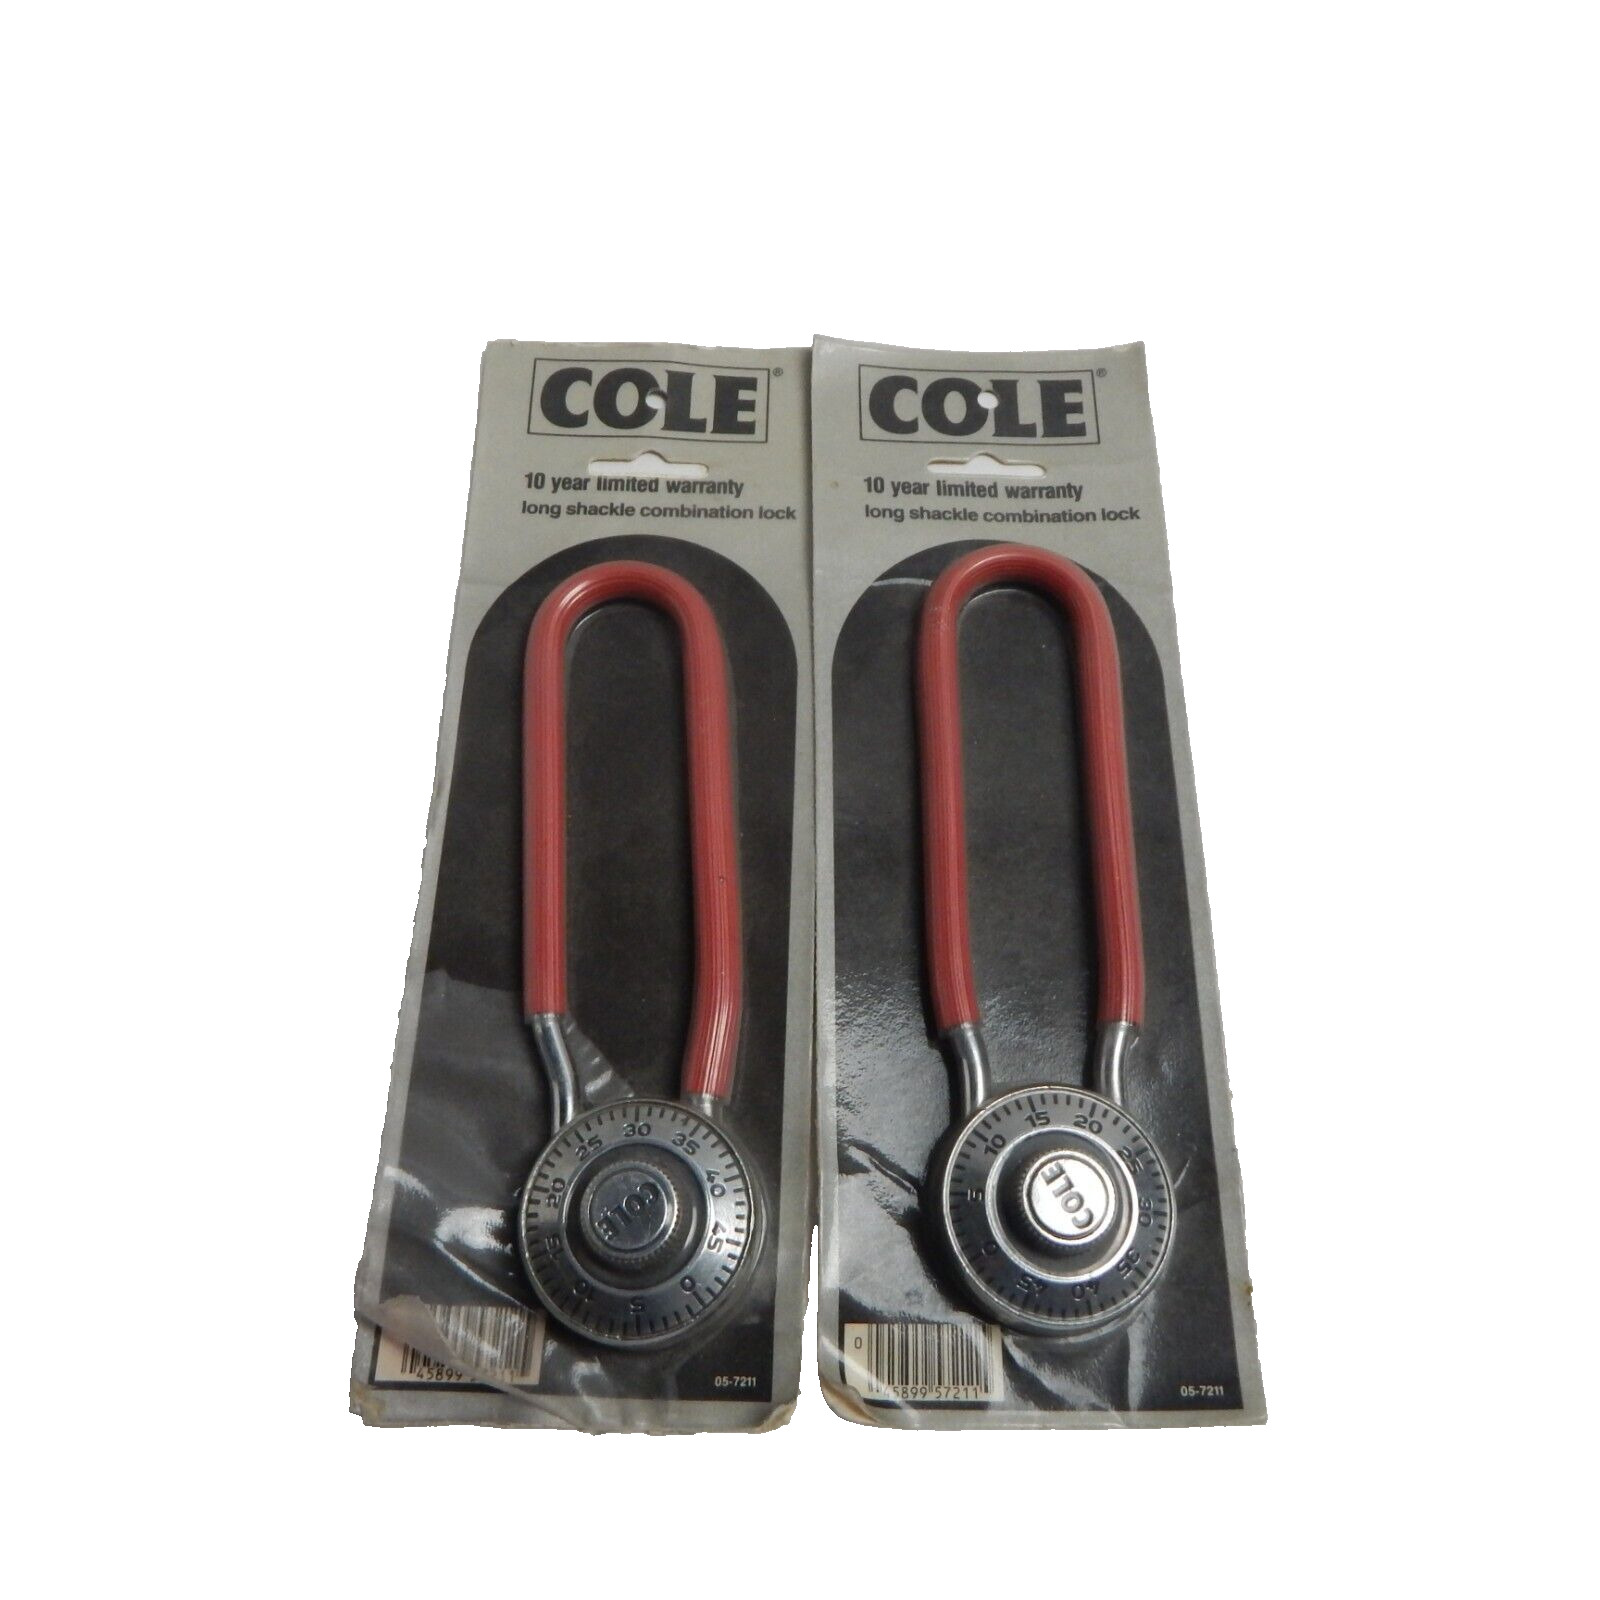 Two (2) Cole Long Shackle Combination Lock Vintage New Old Stock Rare